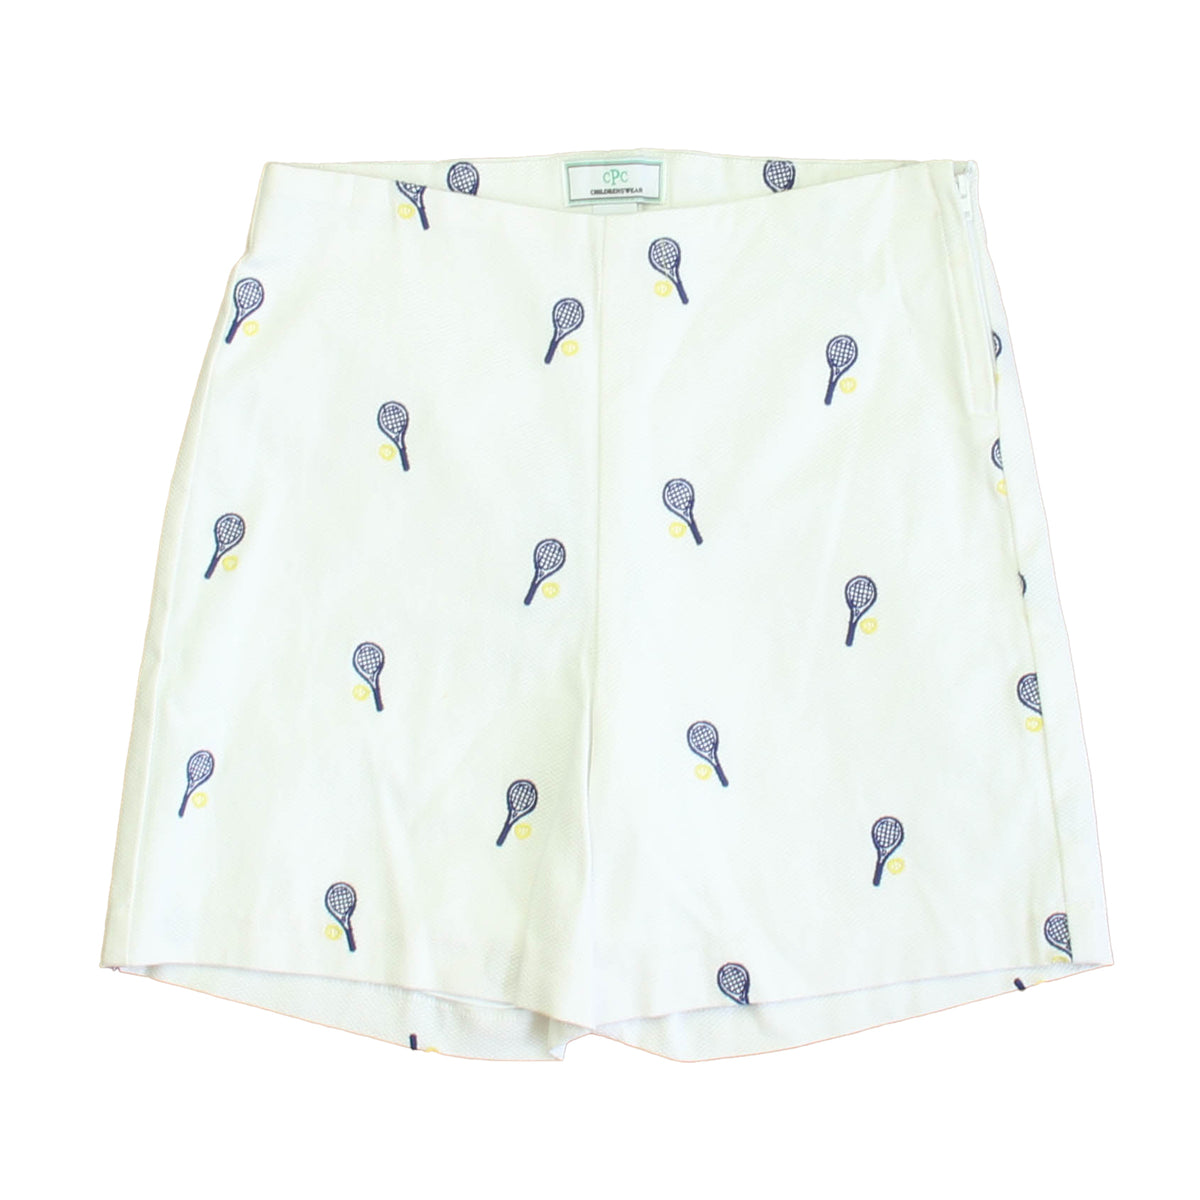 New with Tags: White w/Tennis Rackets Shorts size: 6-14 Years -- FINAL SALE